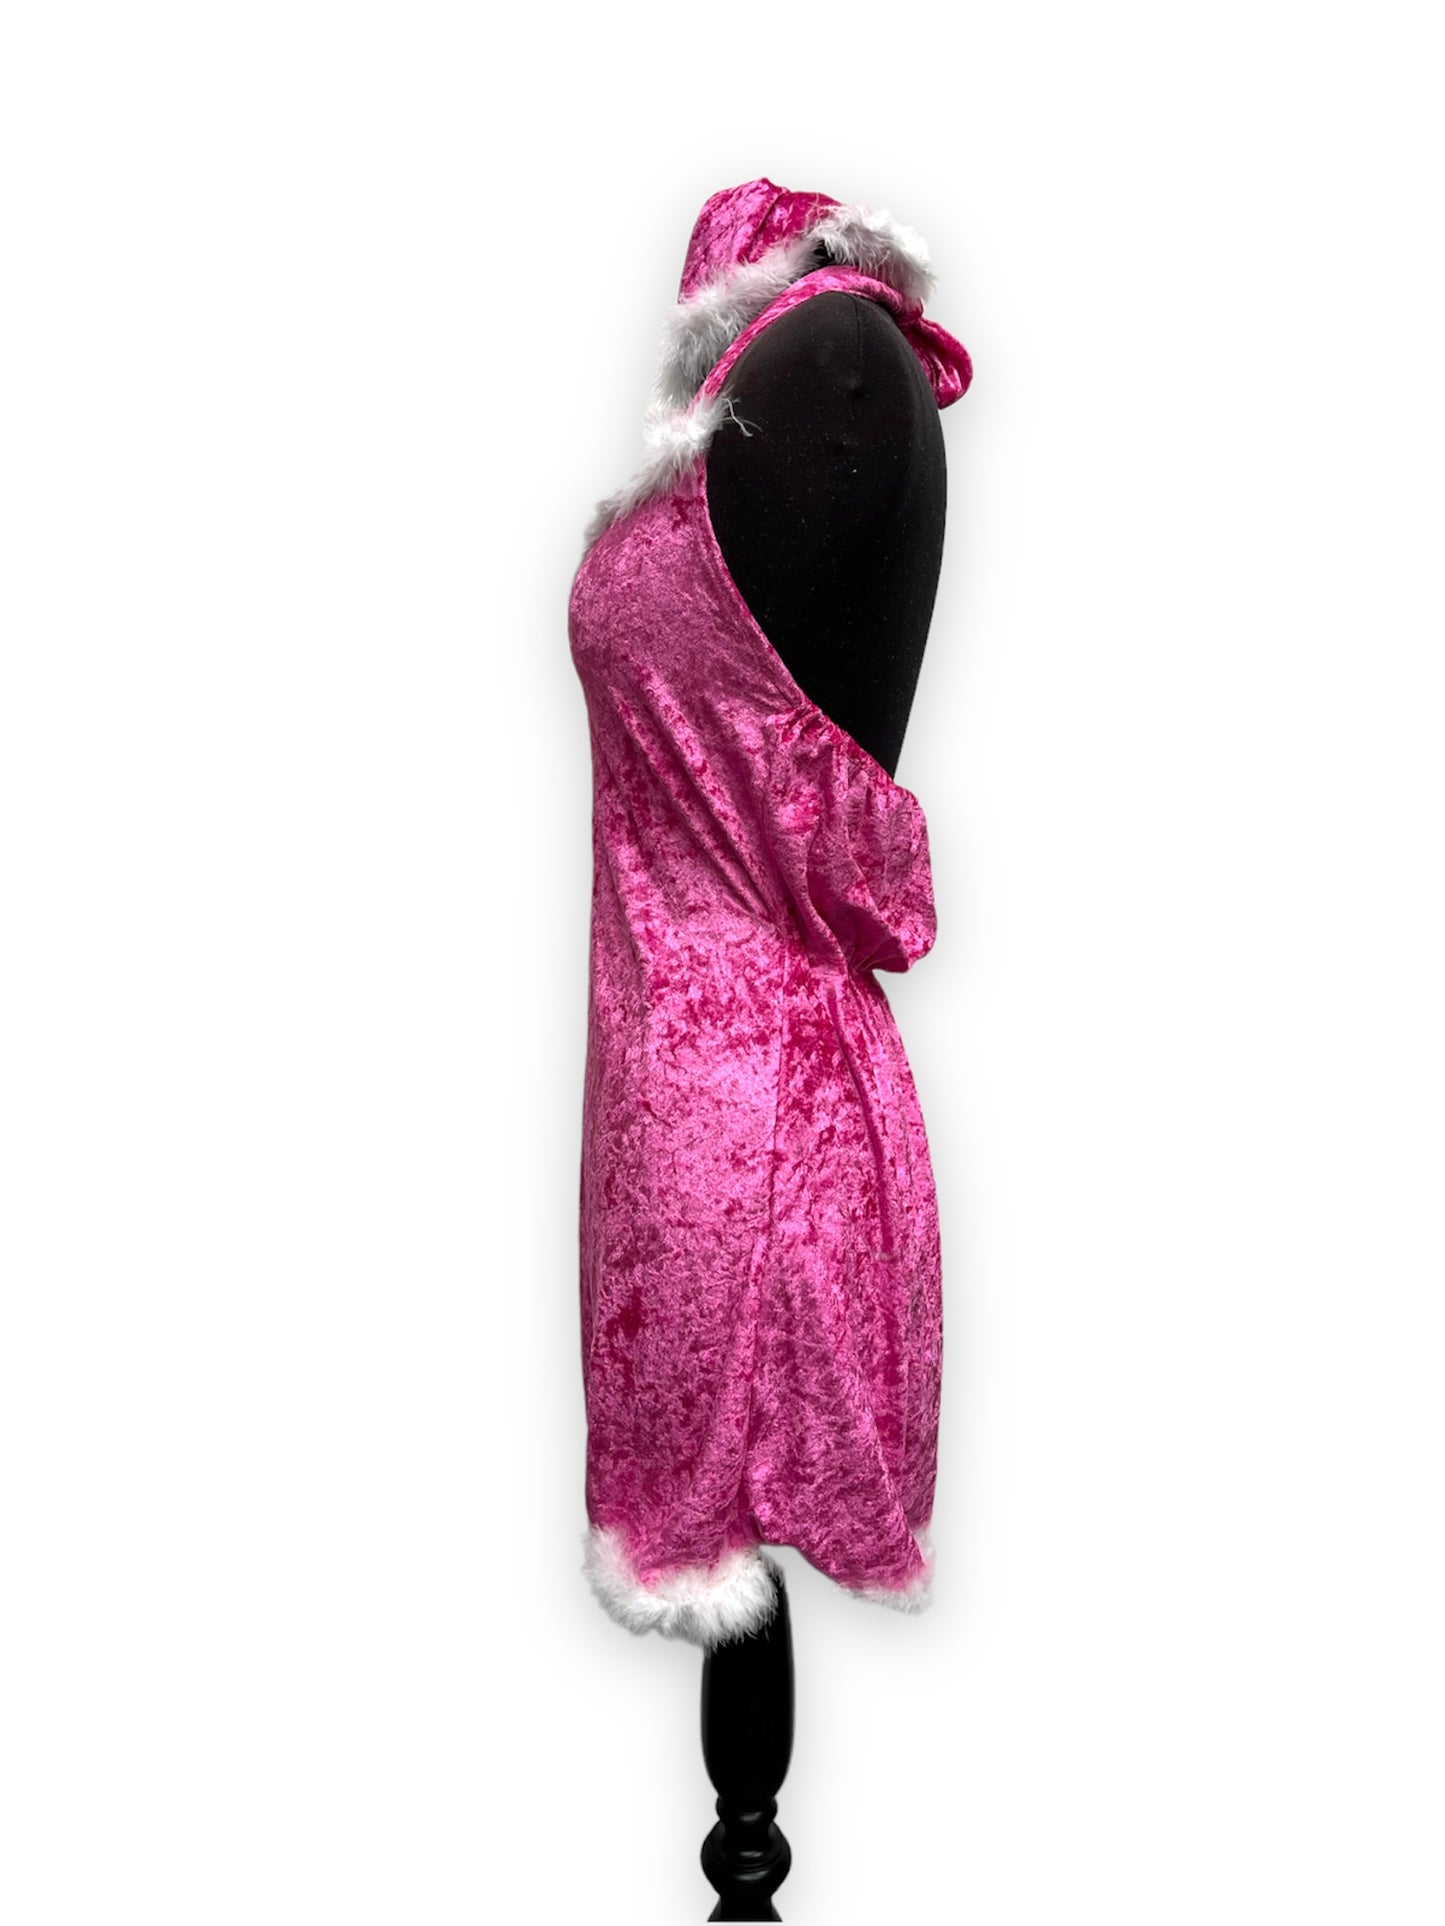 Pink Ms Christmas outfit Size Small - Ex Hire Fancy Dress Costume